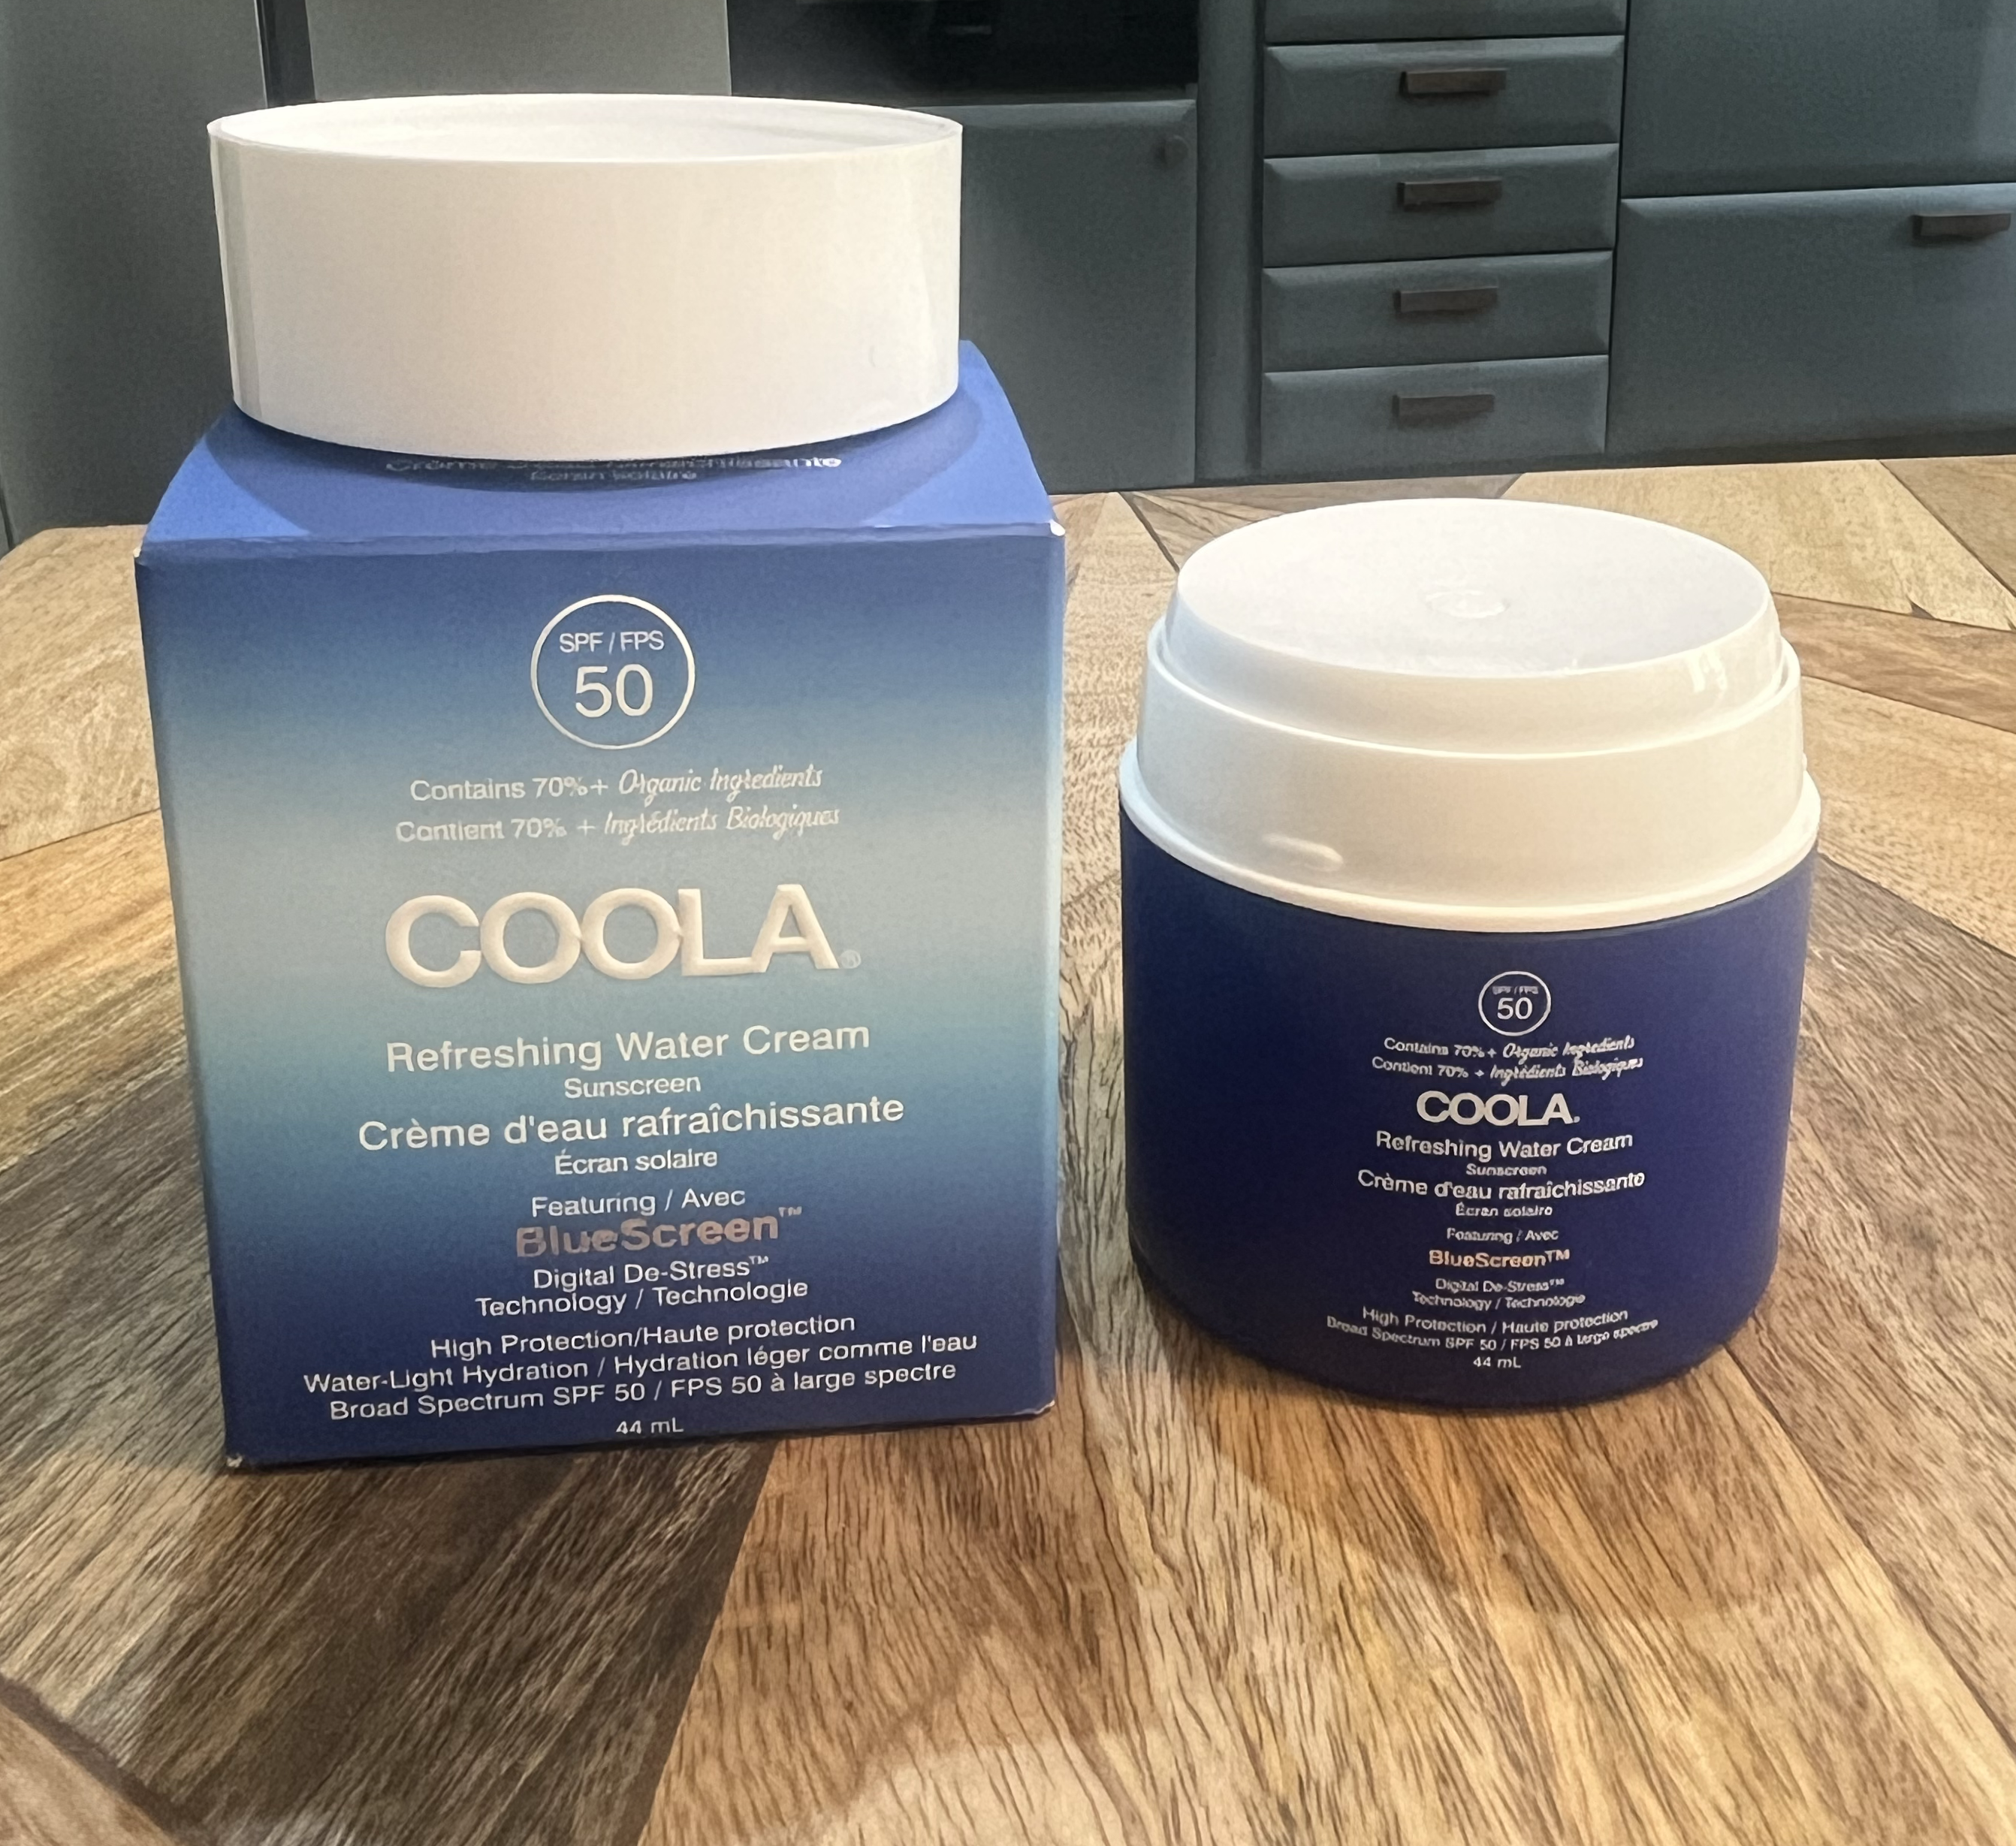 Light and soothing, the Coola Refreshing Water Cream will provide sun protection.